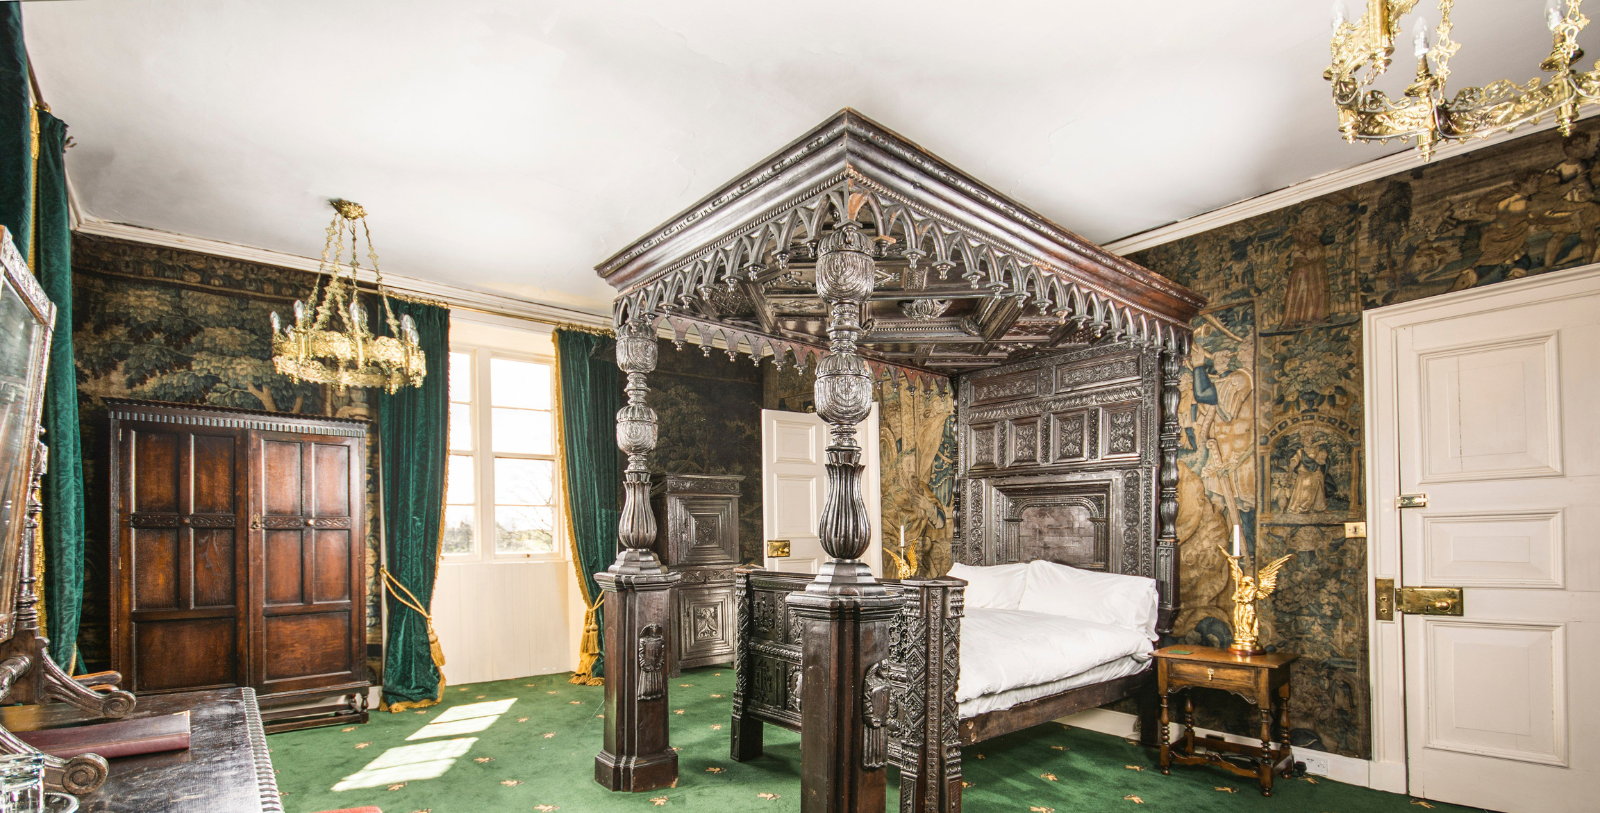 Image of State Room at Appleby Castle in Cumbria, England, constructed in the 12th century, opened in 2017, and a member of Historic Hotels of America since 2023